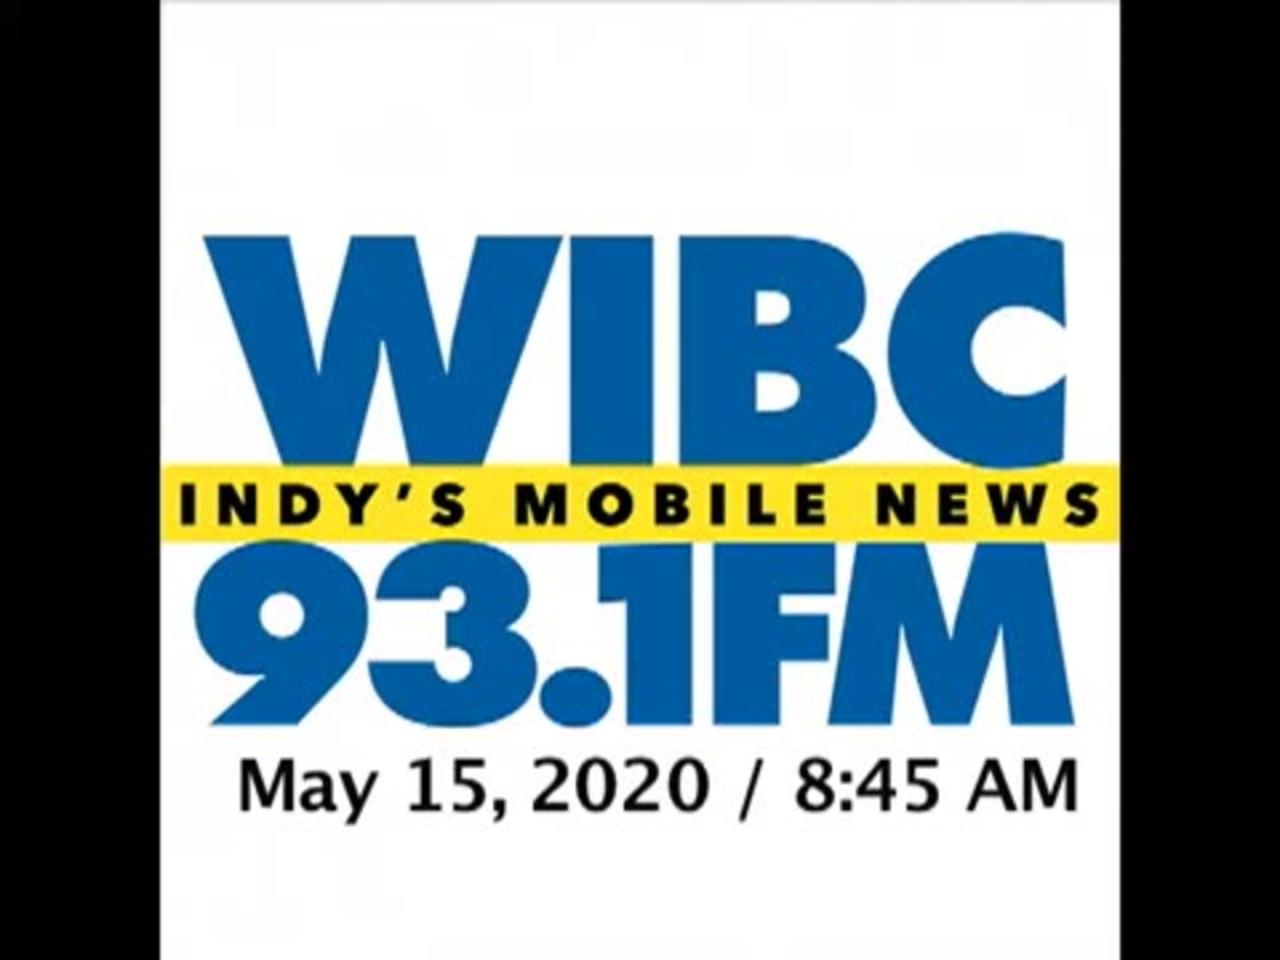 May 15, 2020 -  Indianapolis 8:45 AM Update / WIBC